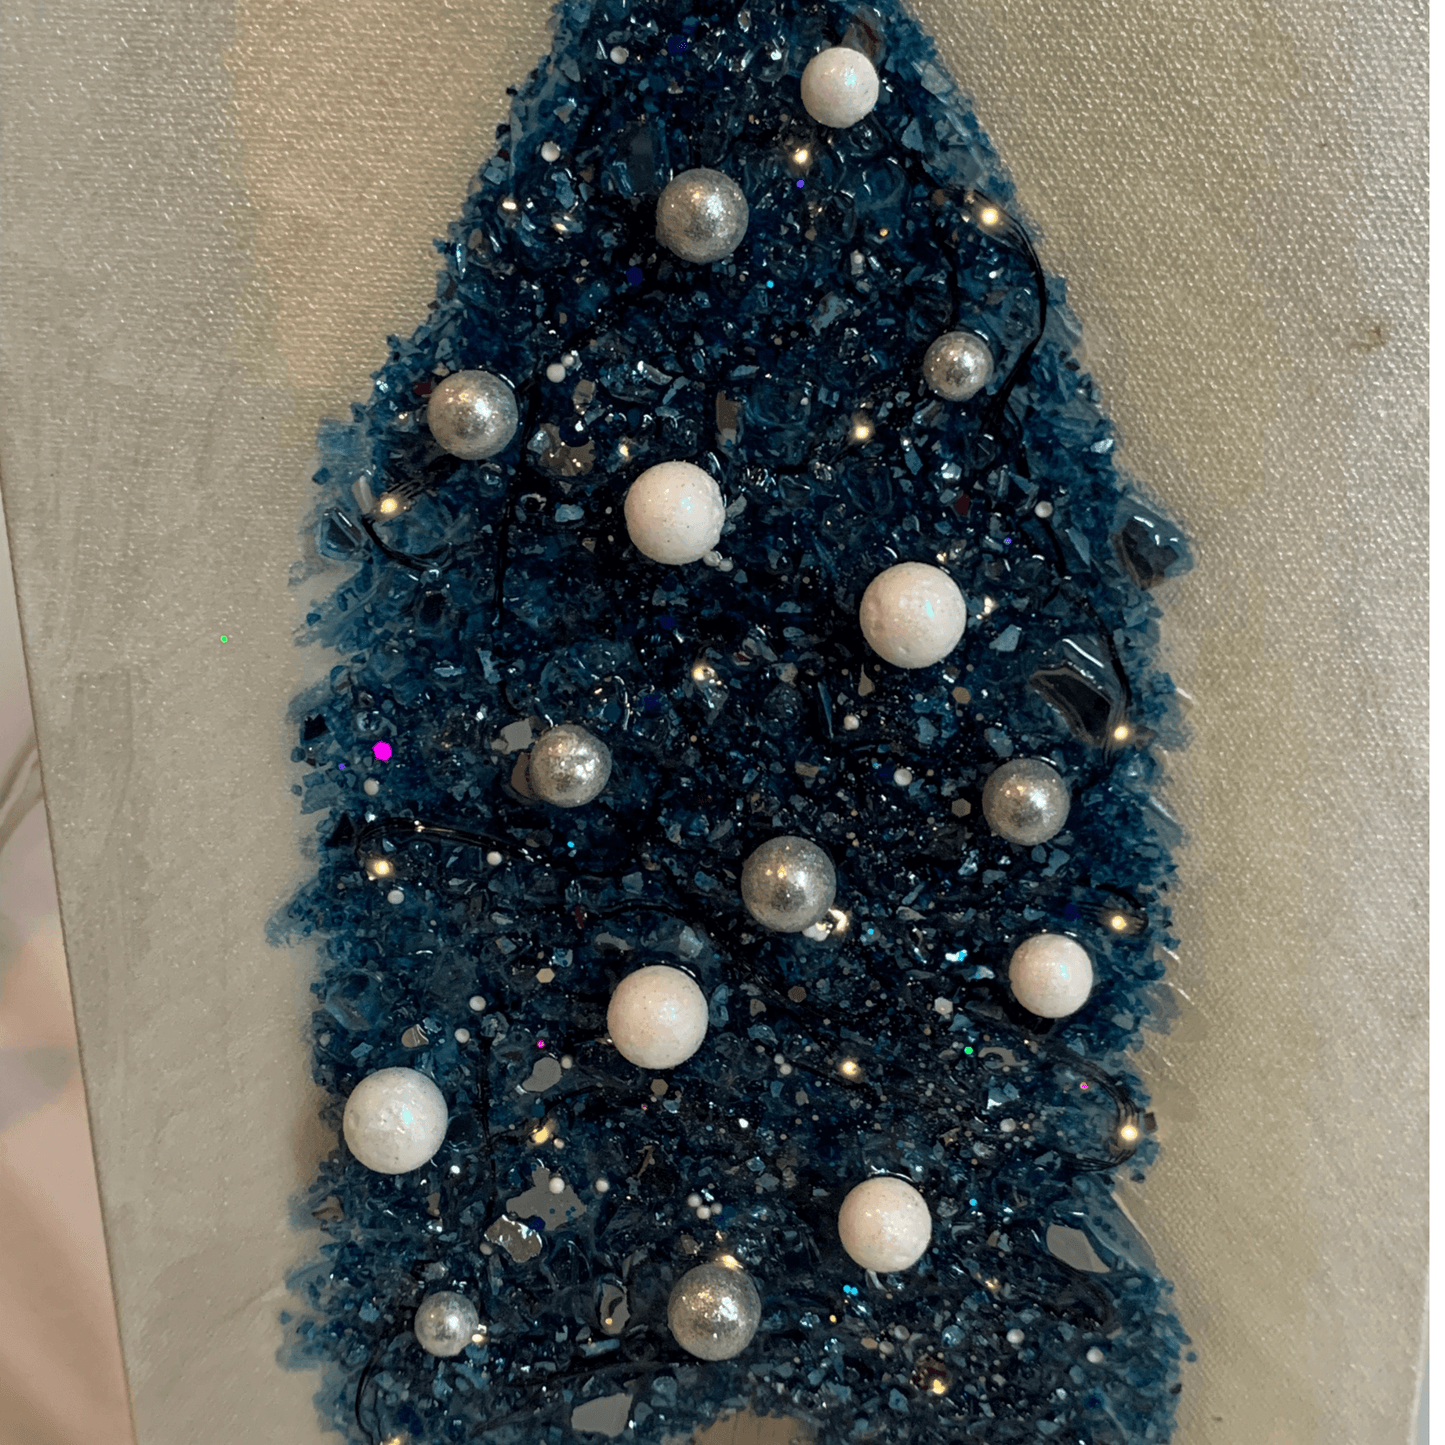 BLUE SILVER AND WHITE CHRISTMAS TREE Mixed Media Modern Art